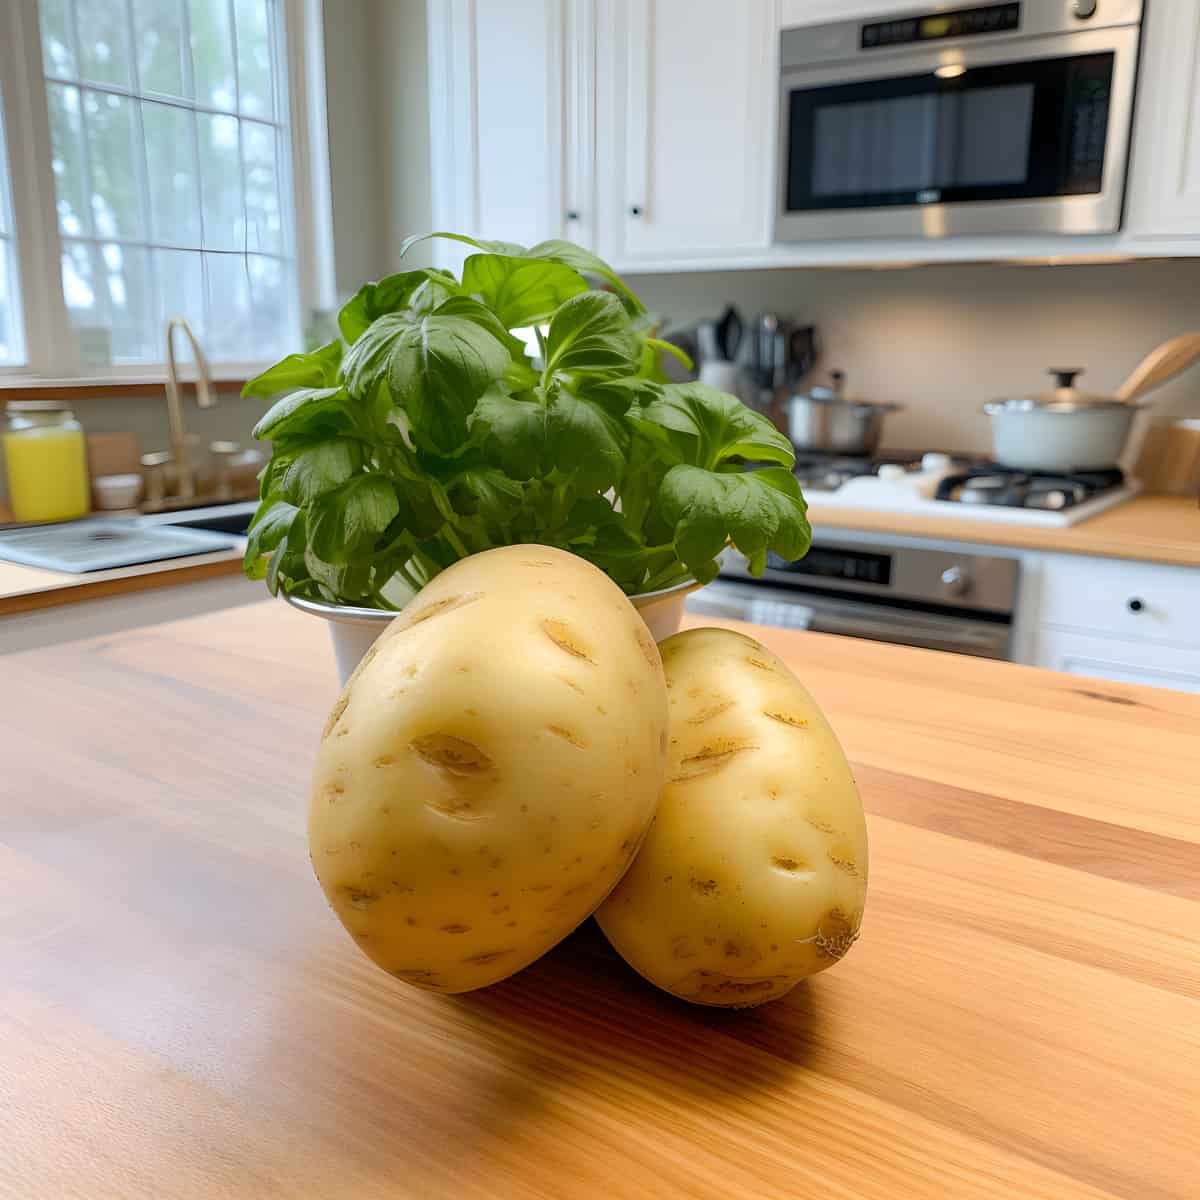 Skerry Champion Potatoes on a kitchen counter